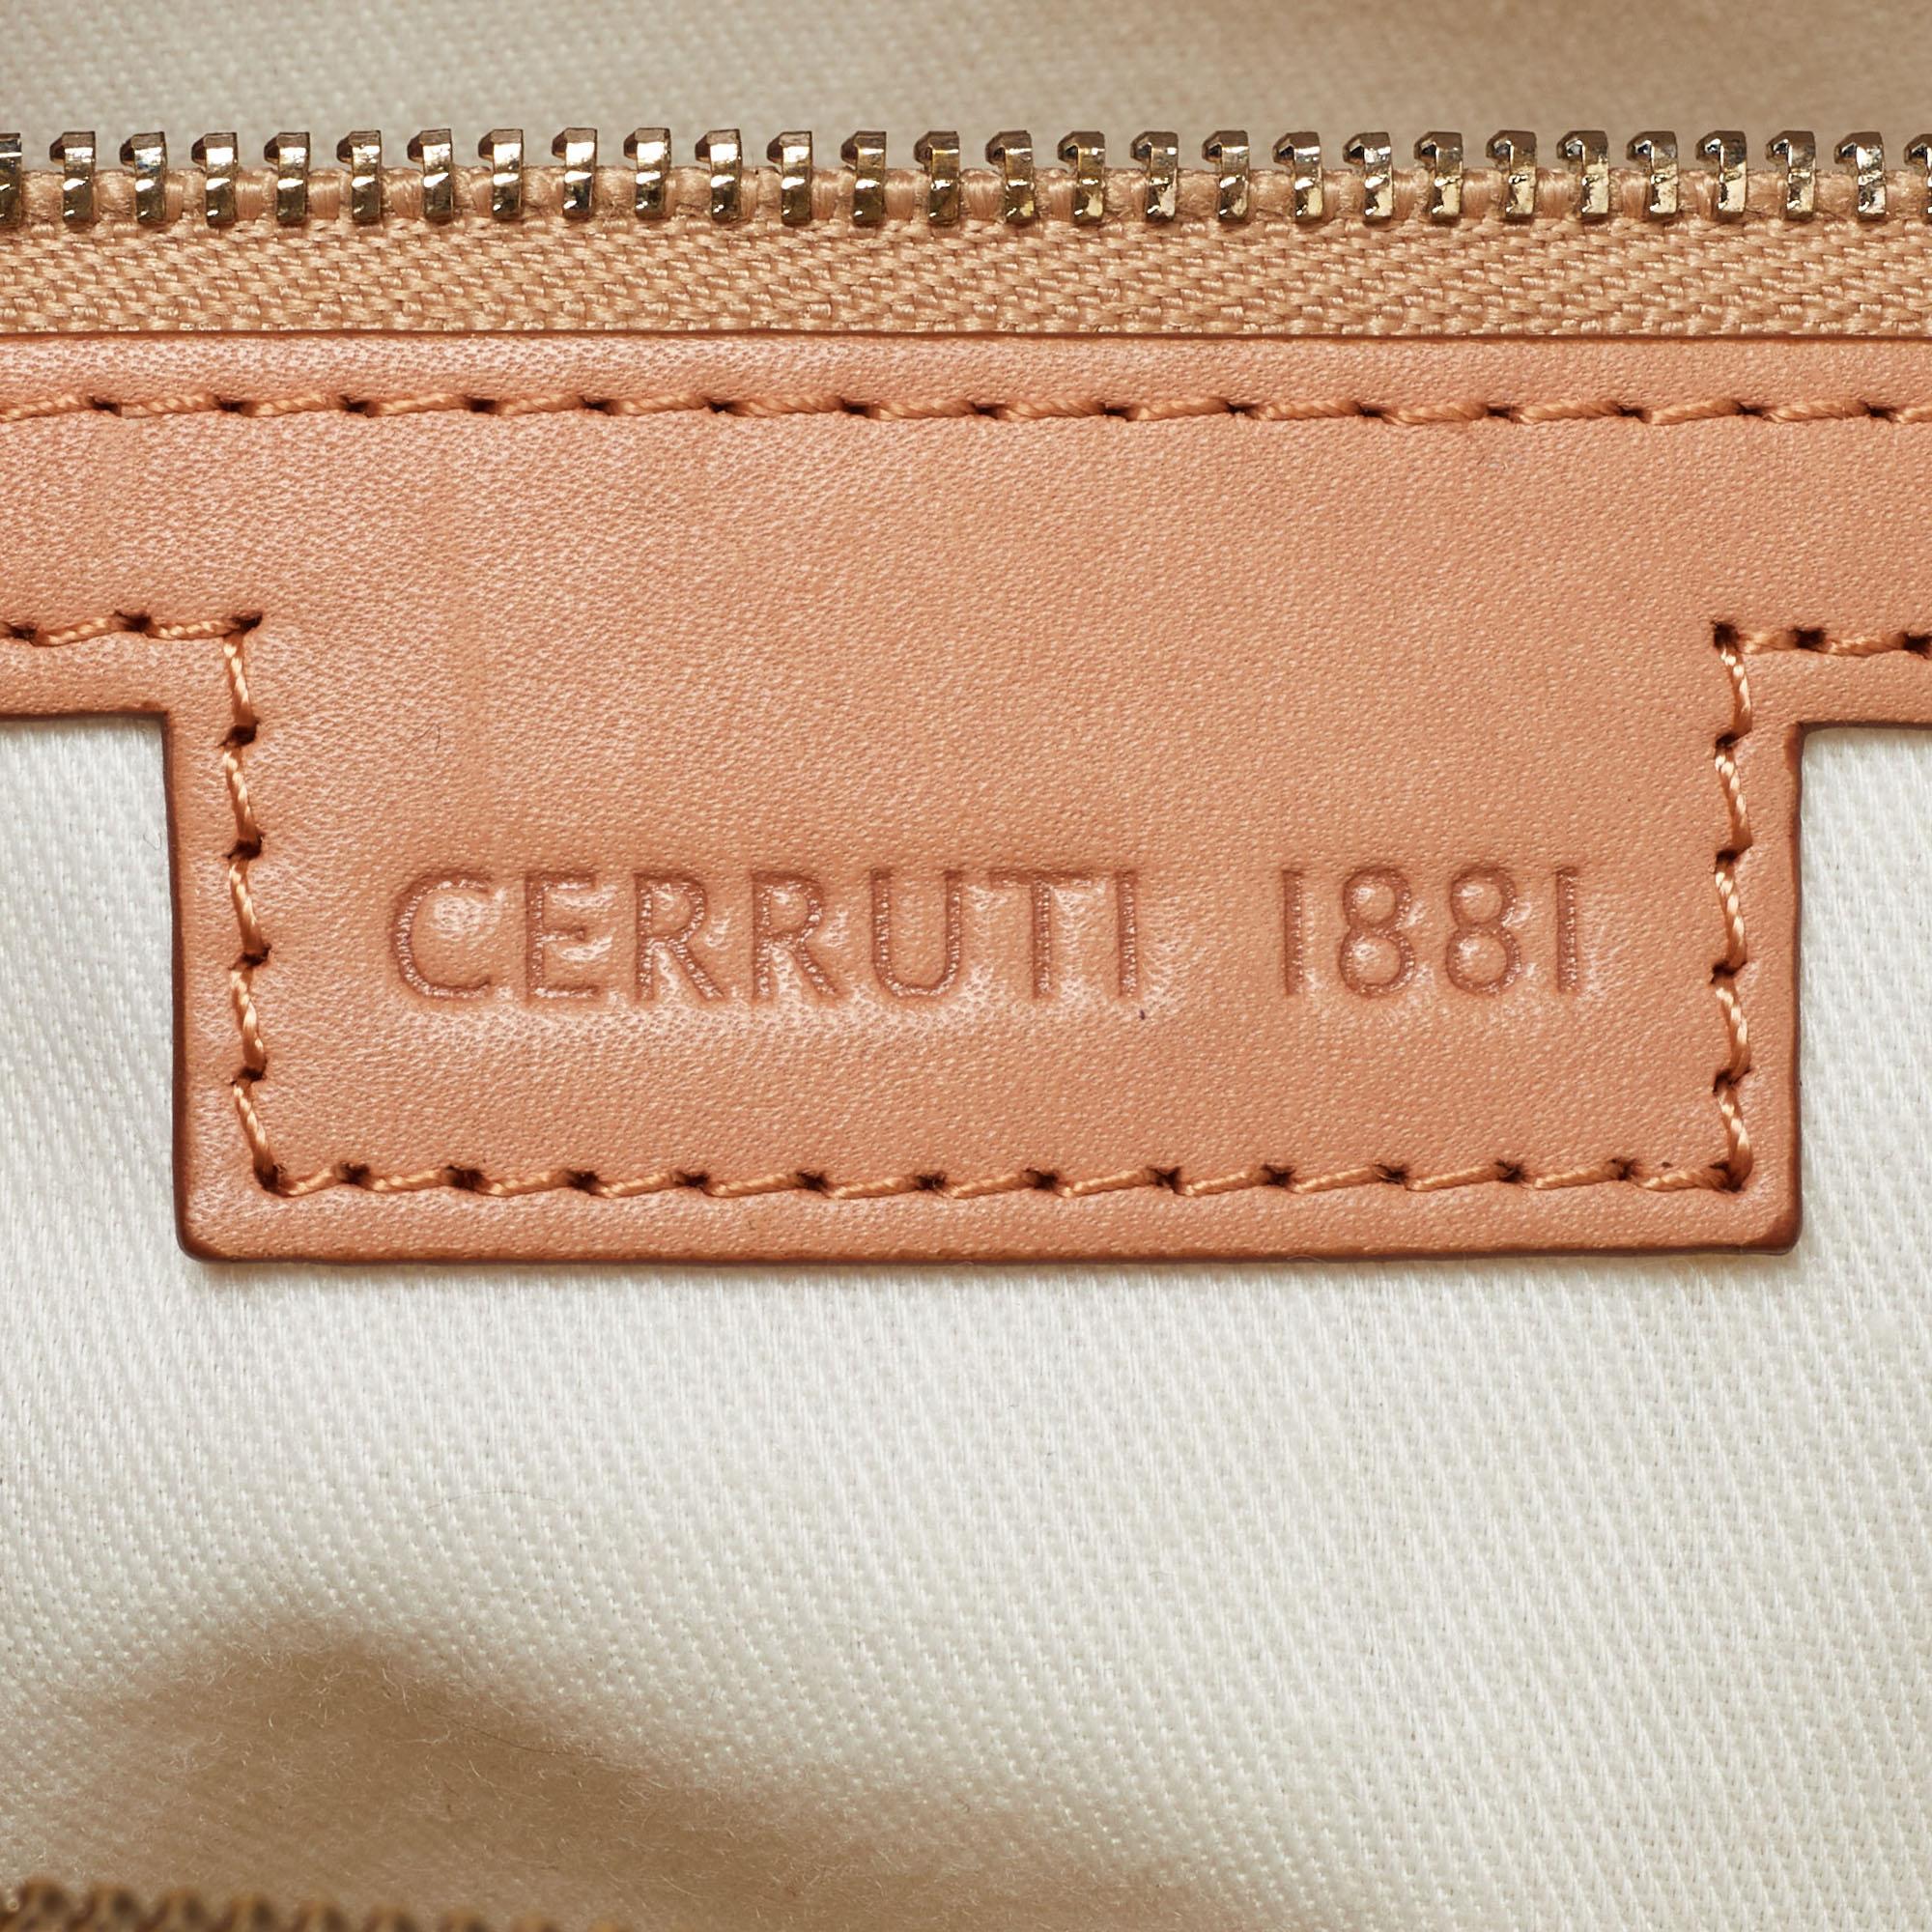 Cerruti Multicolor Signature Coated Canvas and Leather Bag For Sale 8